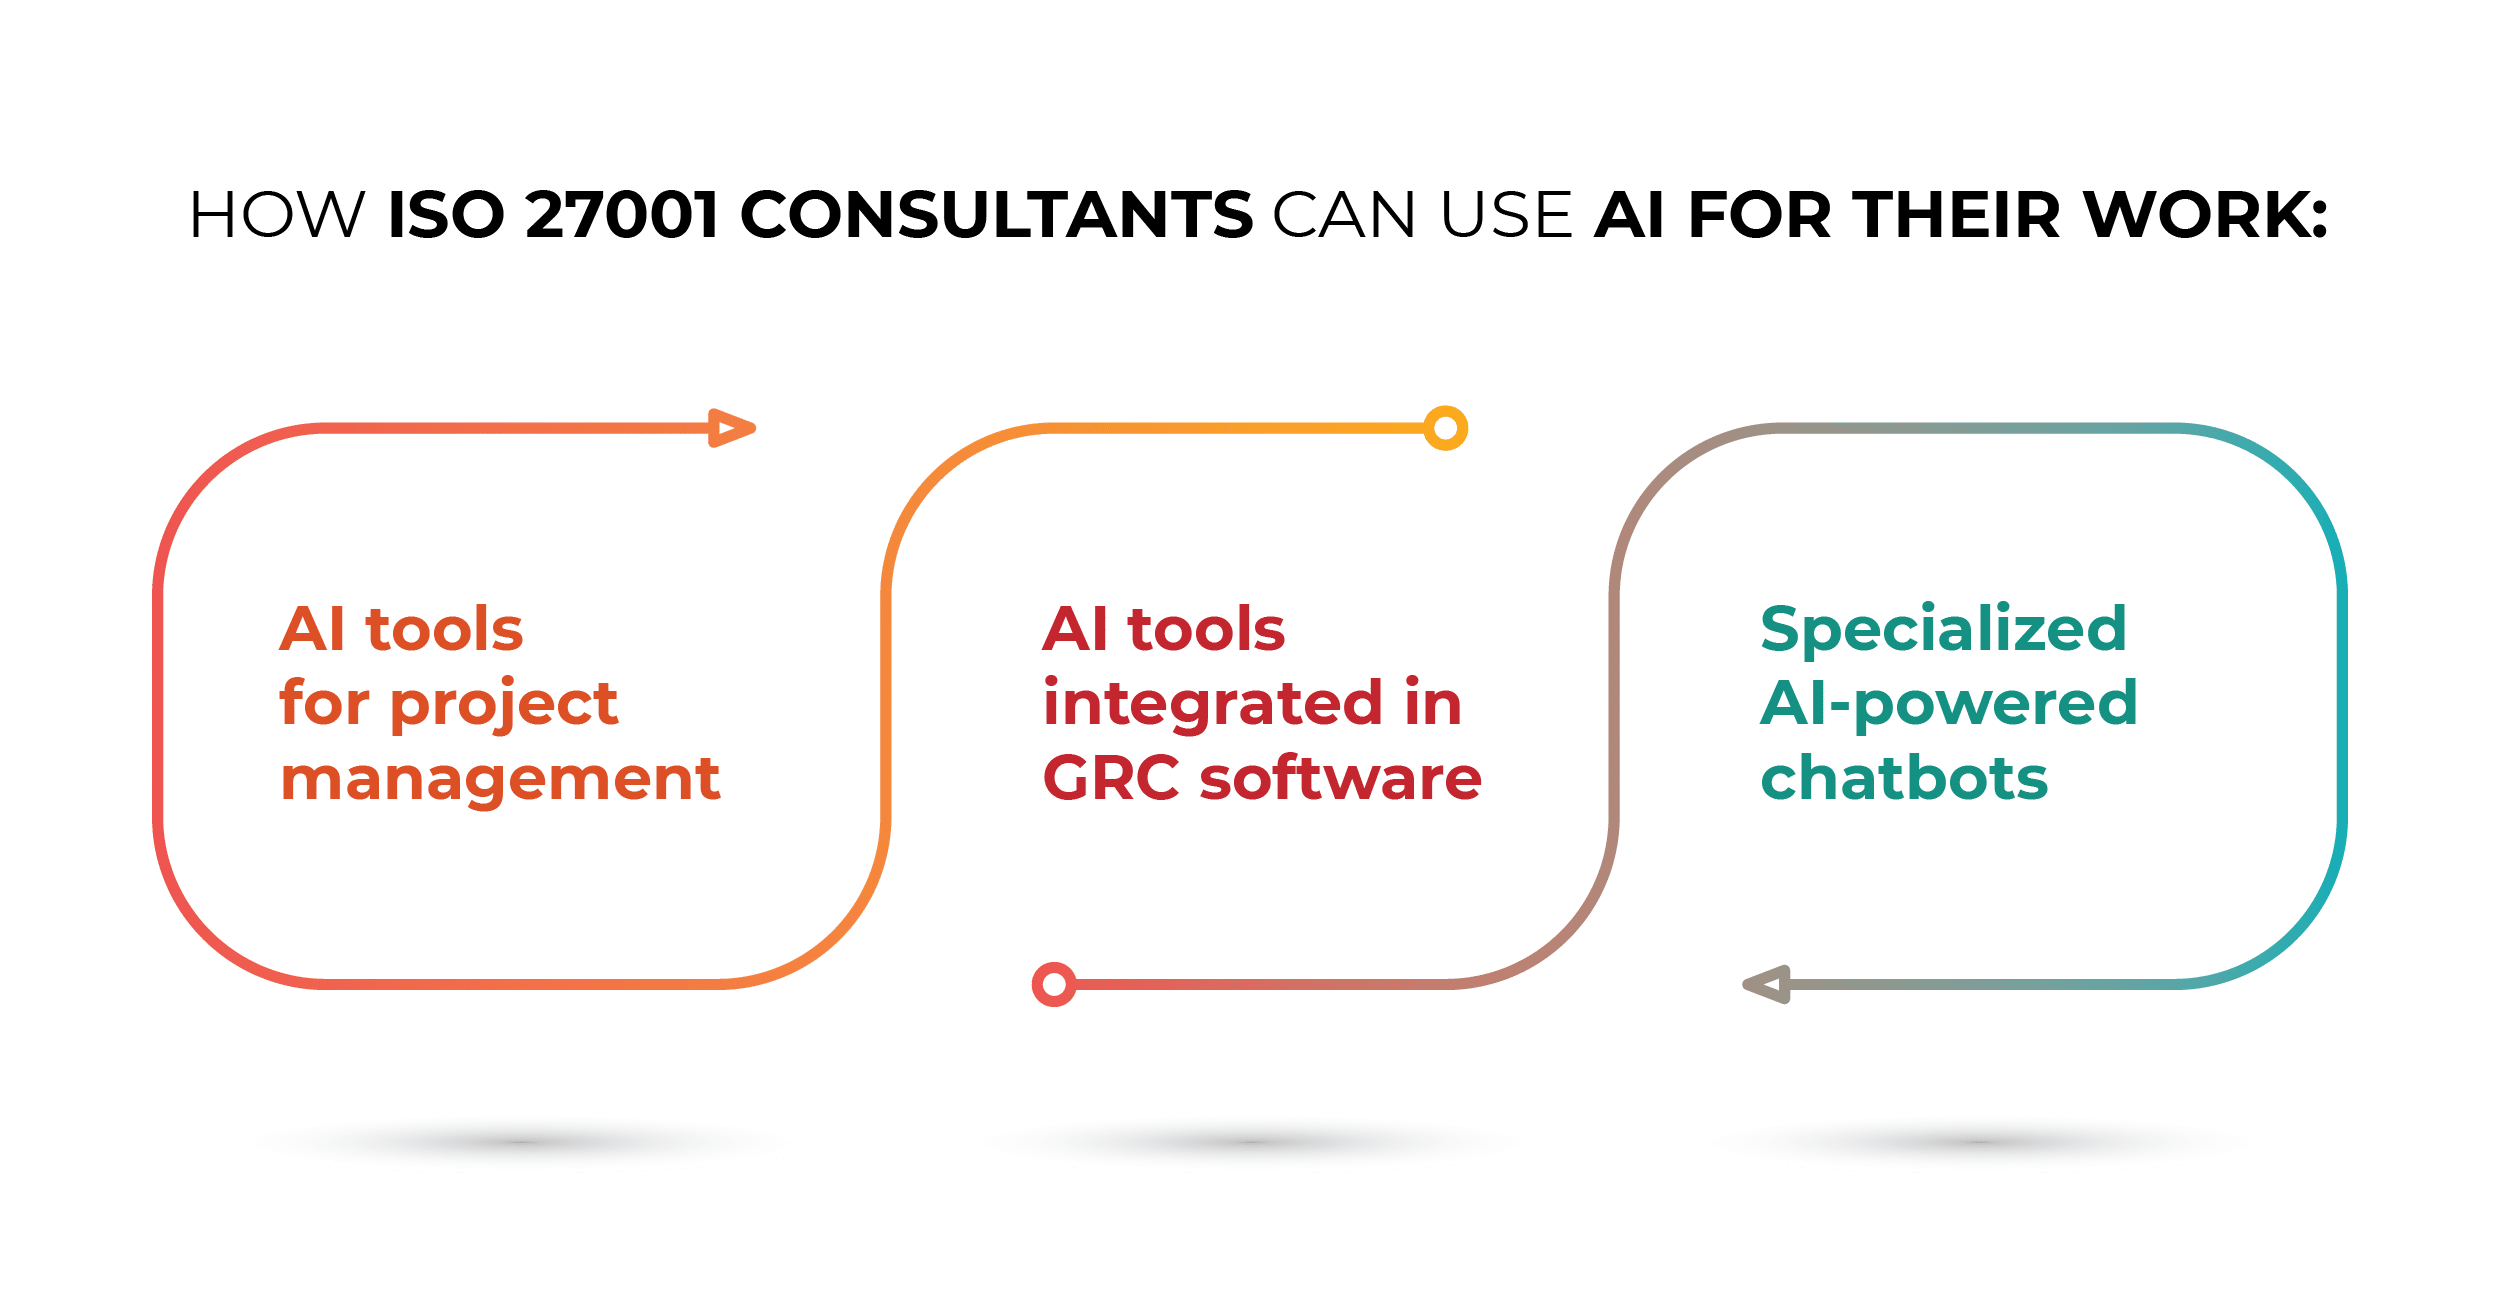 How ISO 27001 consultants can use AI for their work